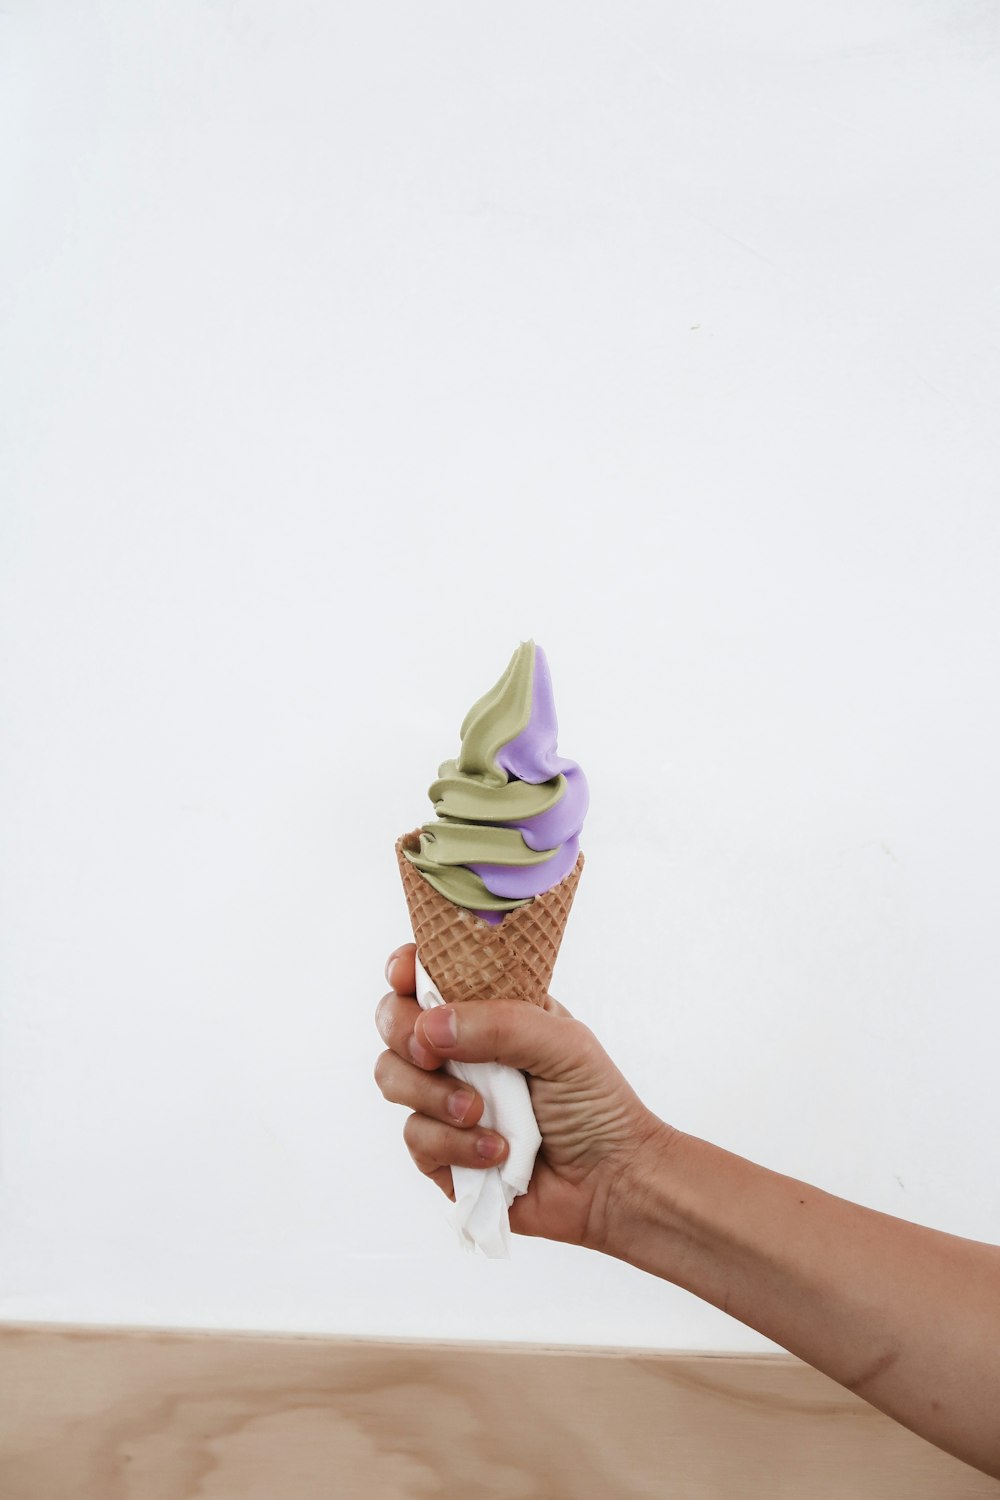 person holding ice cream cone with pink ice cream